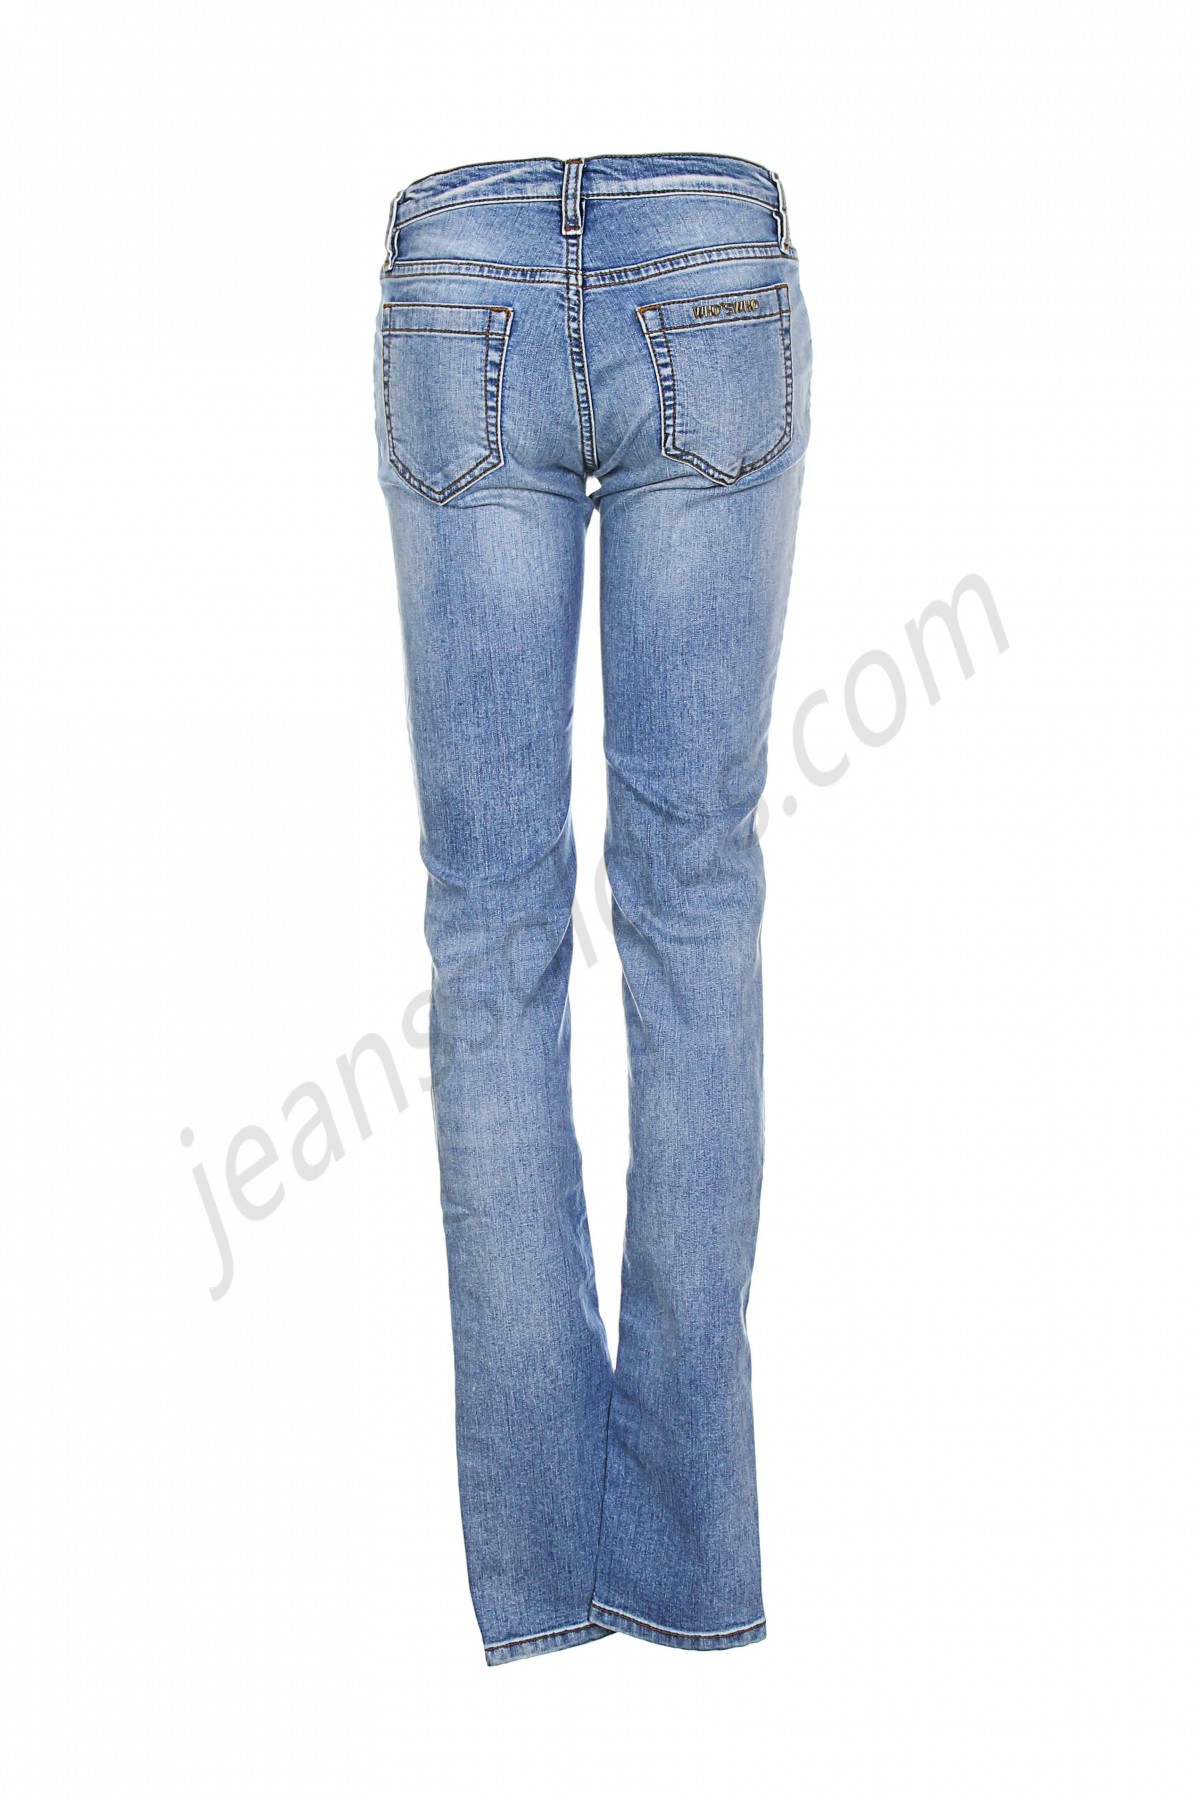 who's who-Jeans coupe slim prix d’amis - -1